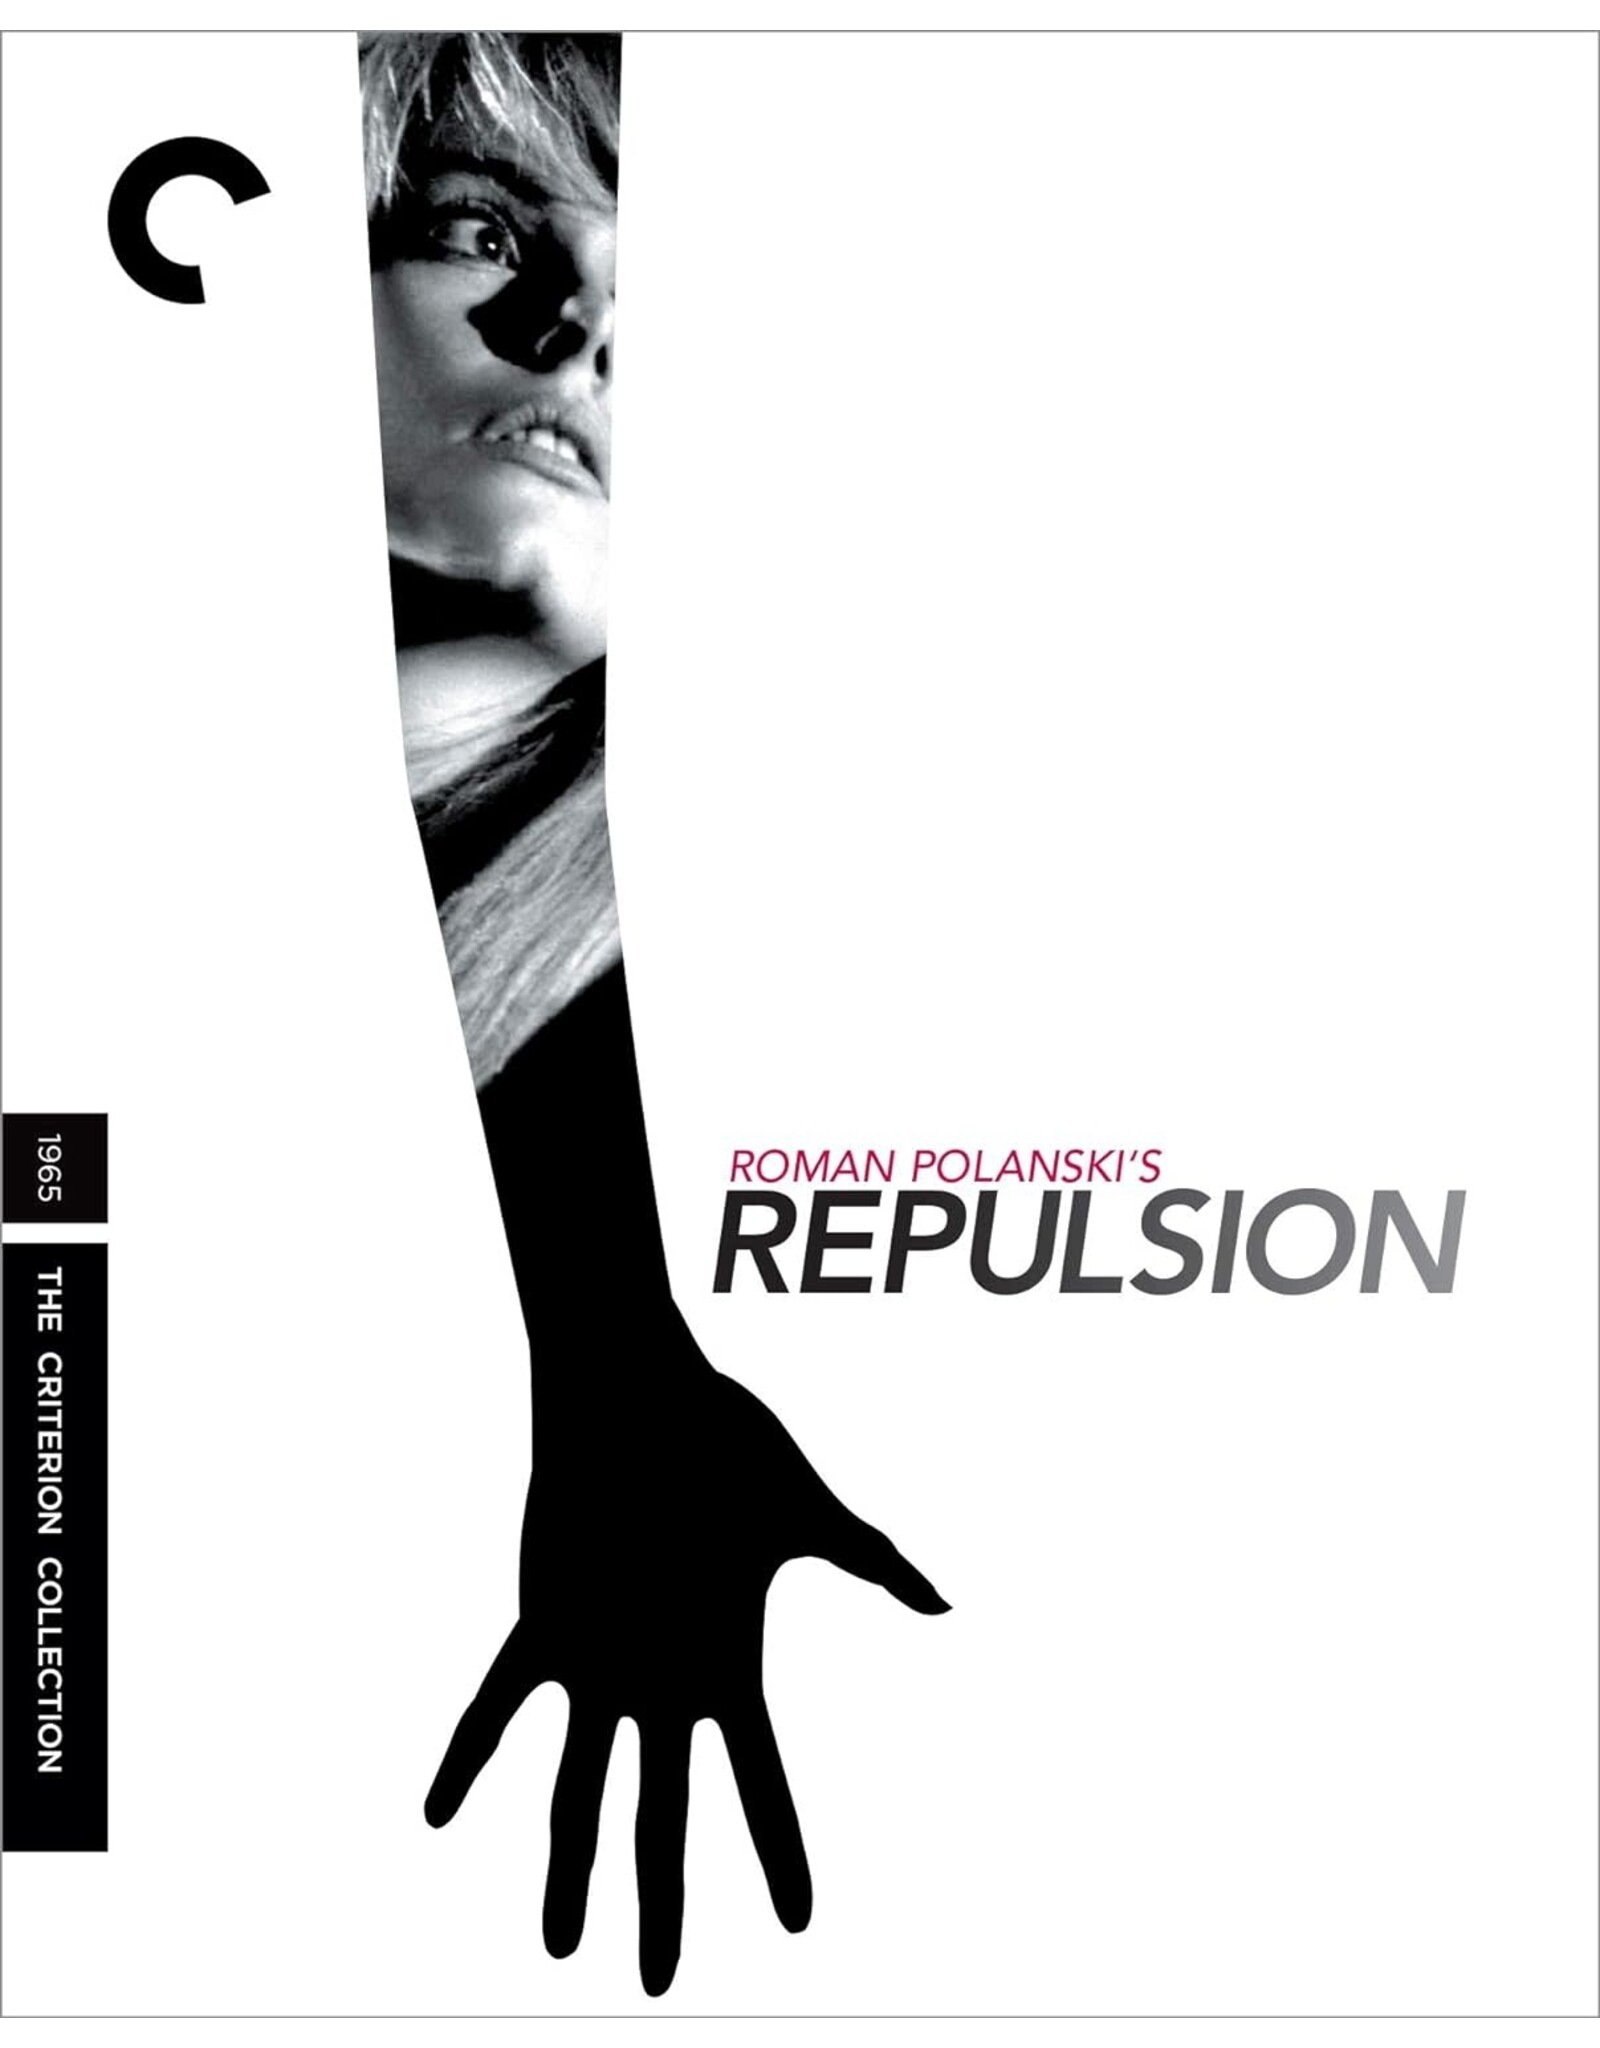 Criterion Collection Repulsion - Criterion Collection (Used)